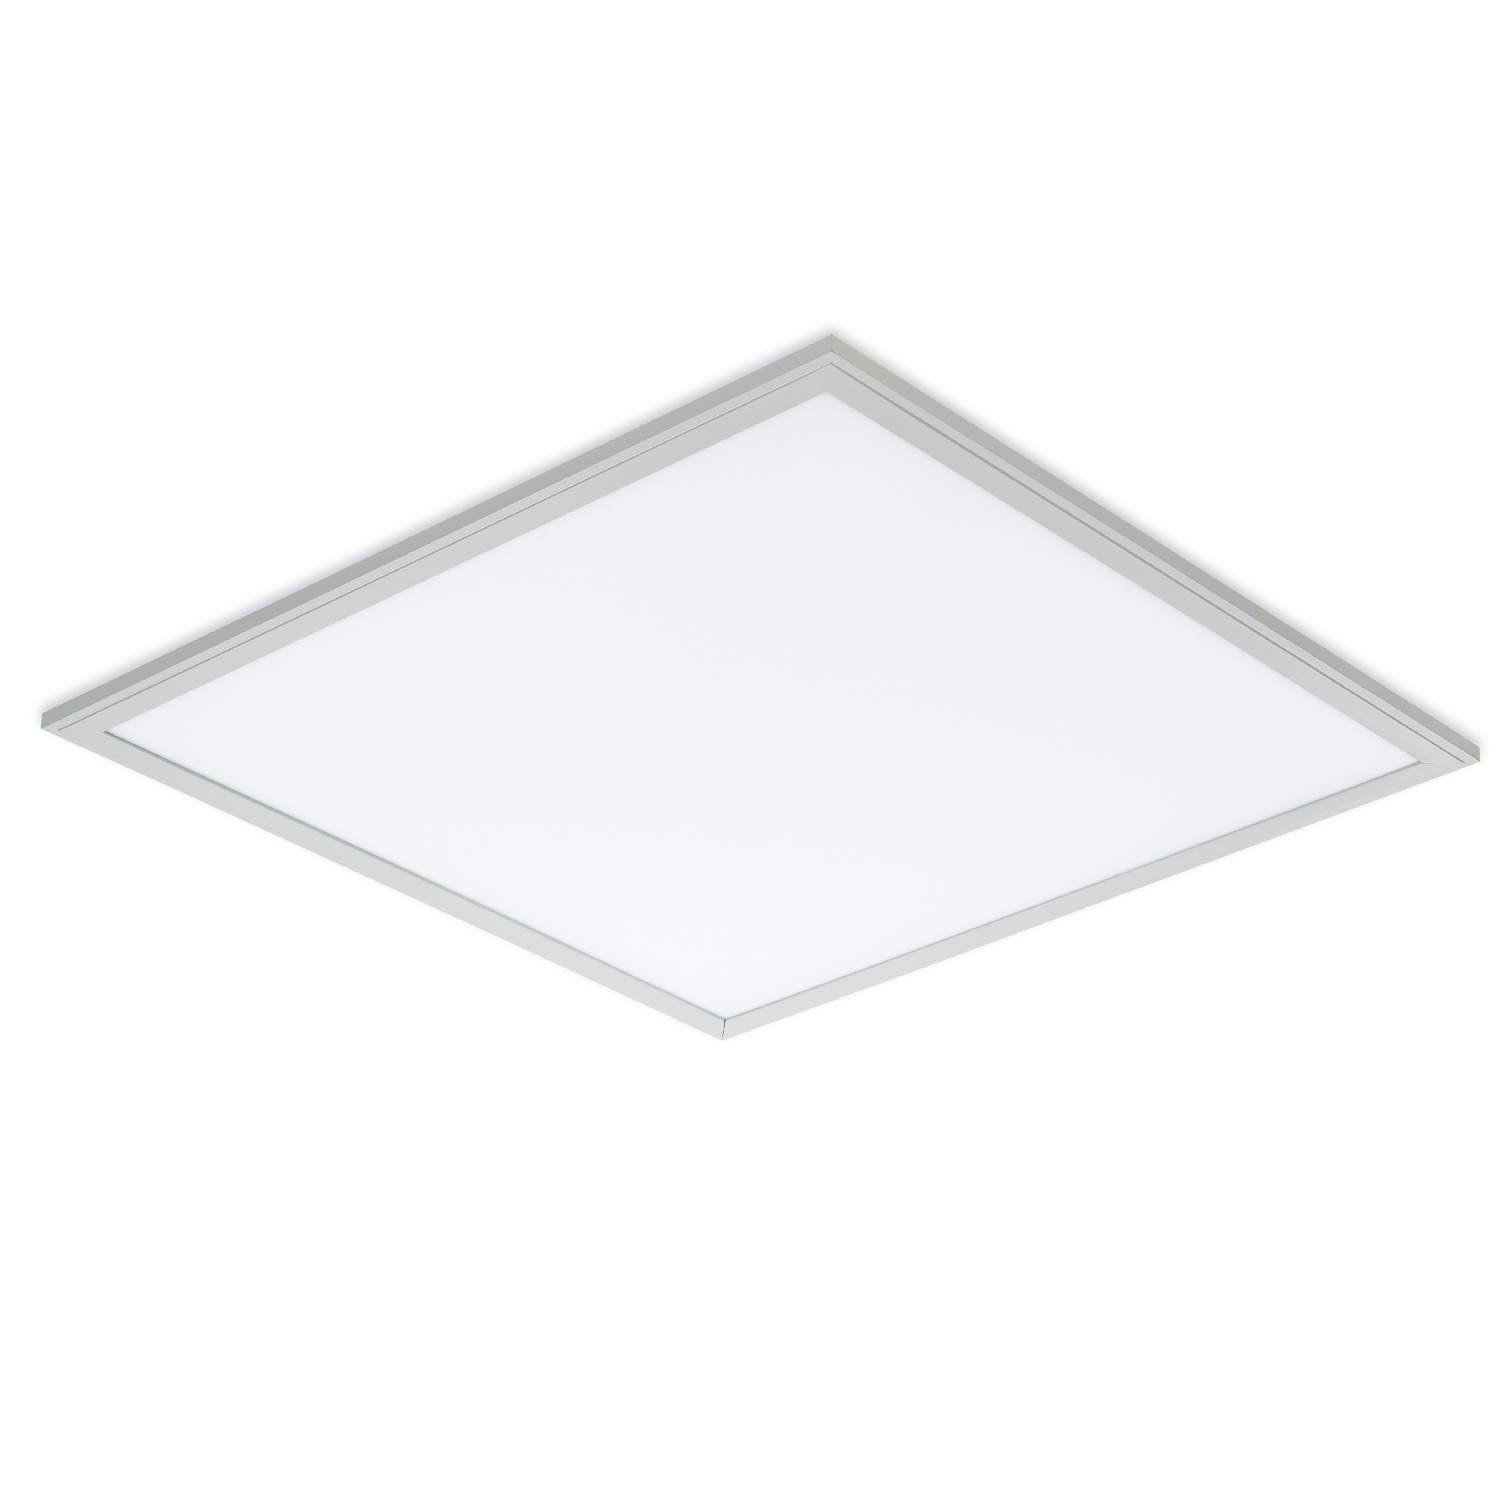 The SunTrac™ Panel Light is a commercial addition to the SunTrac line of Bluetooth-controlled, automated circadian lighting fixtures. With beautifully even light distribution and a slim design, this panel light is an attractive option for commercial installations, such as senior living communities, offices, healthcare facilities, schools and beyond. The Panel Light offers the same dynamic spectral capabilities and control options as existing SunTrac fixtures, in a variety of sizes.